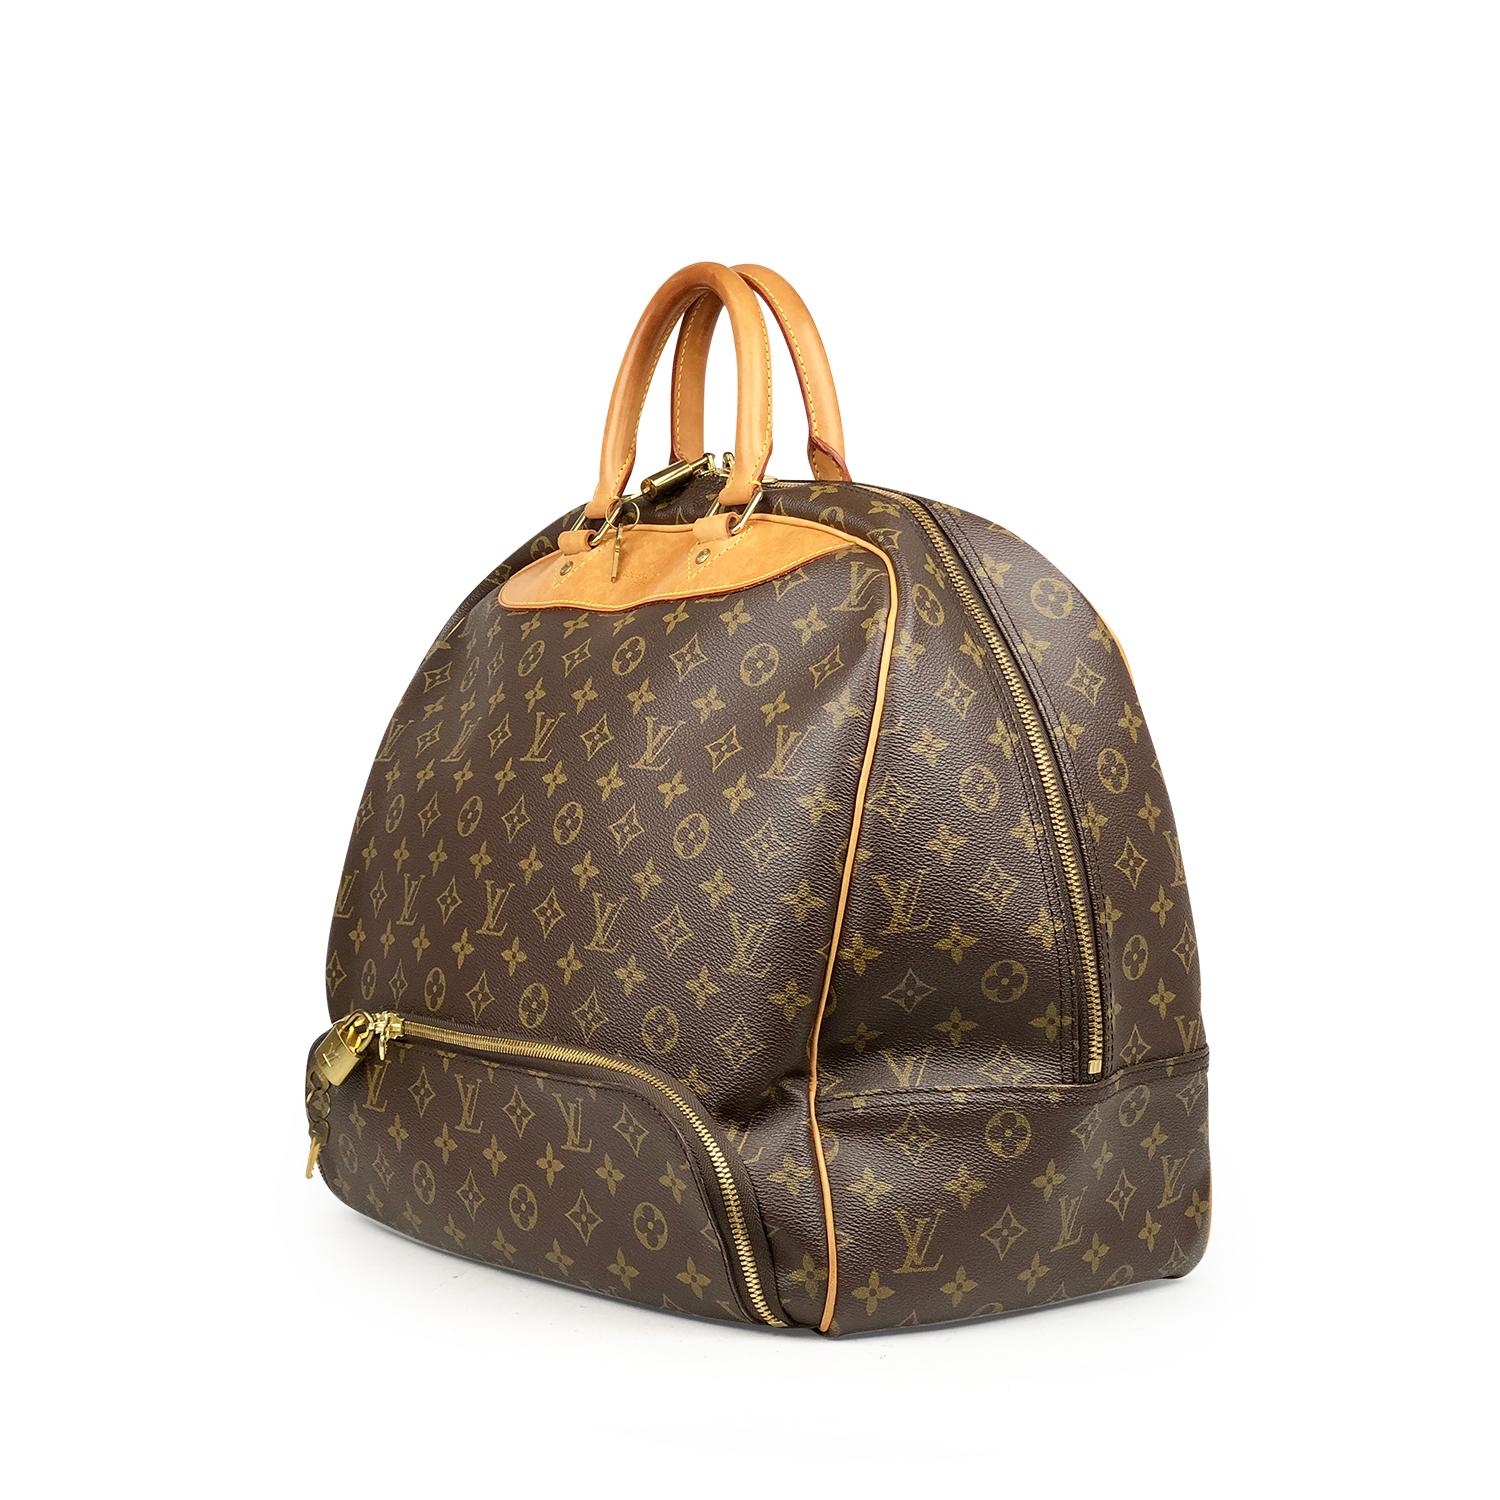 Moka and olive-brown monogram coated canvas Louis Vuitton Evasion bag with

- Brass hardware
- Caramel vachetta leather trim
- Dual rolled top handles
- Beige coated canvas lining
- Single slip pocket at interior and two-way zip closure at